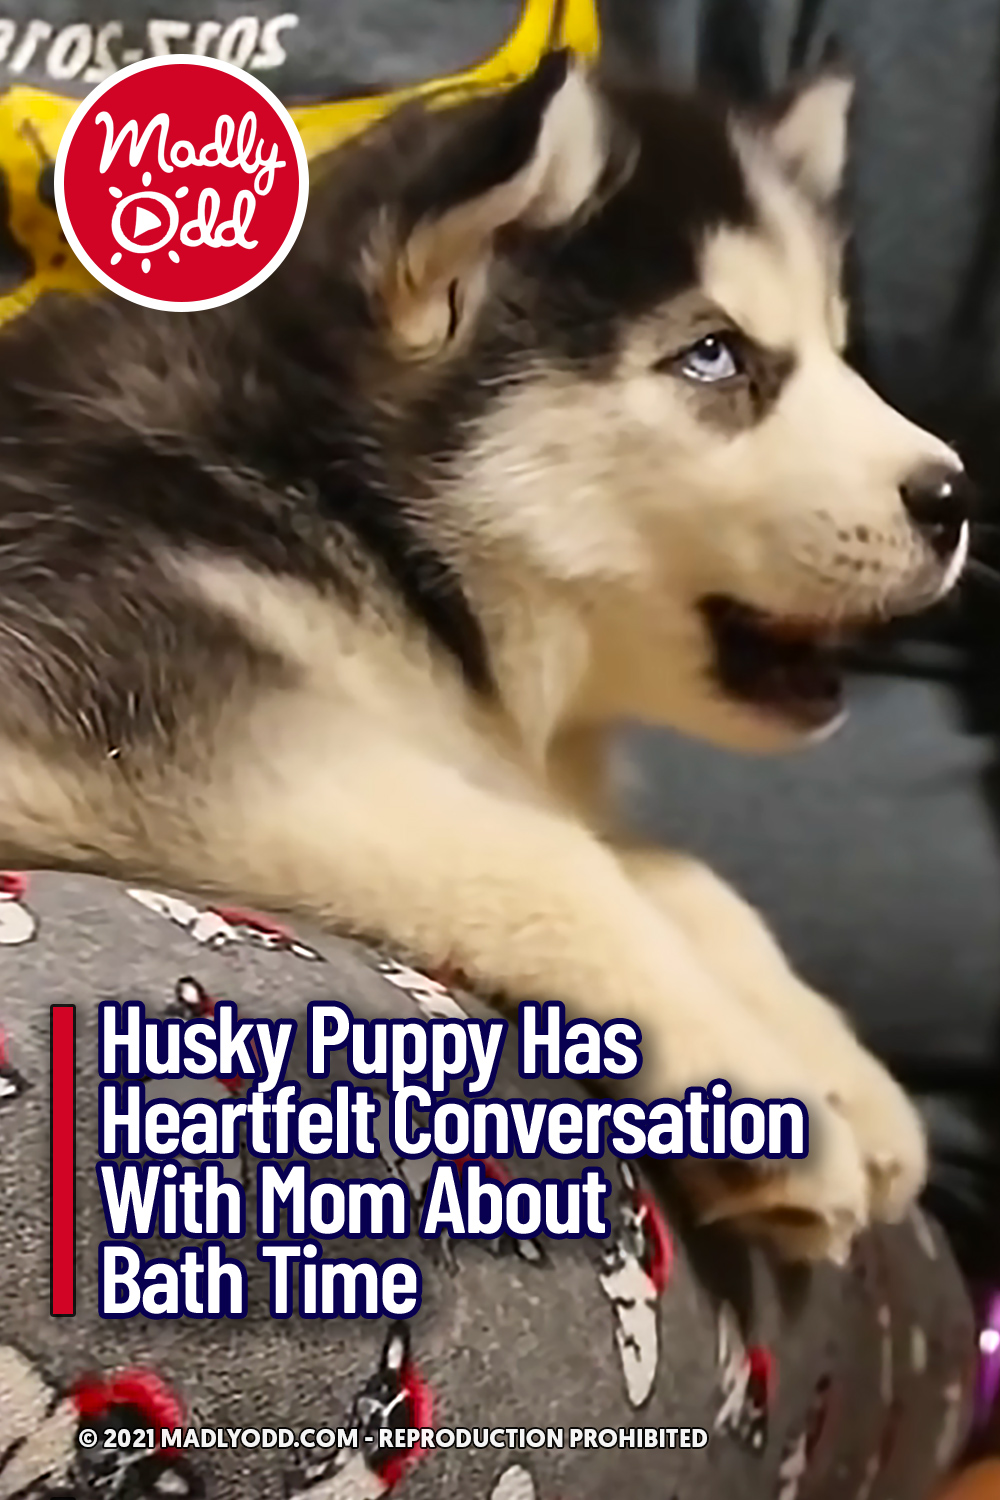 Husky Puppy Has Heartfelt Conversation With Mom About Bath Time